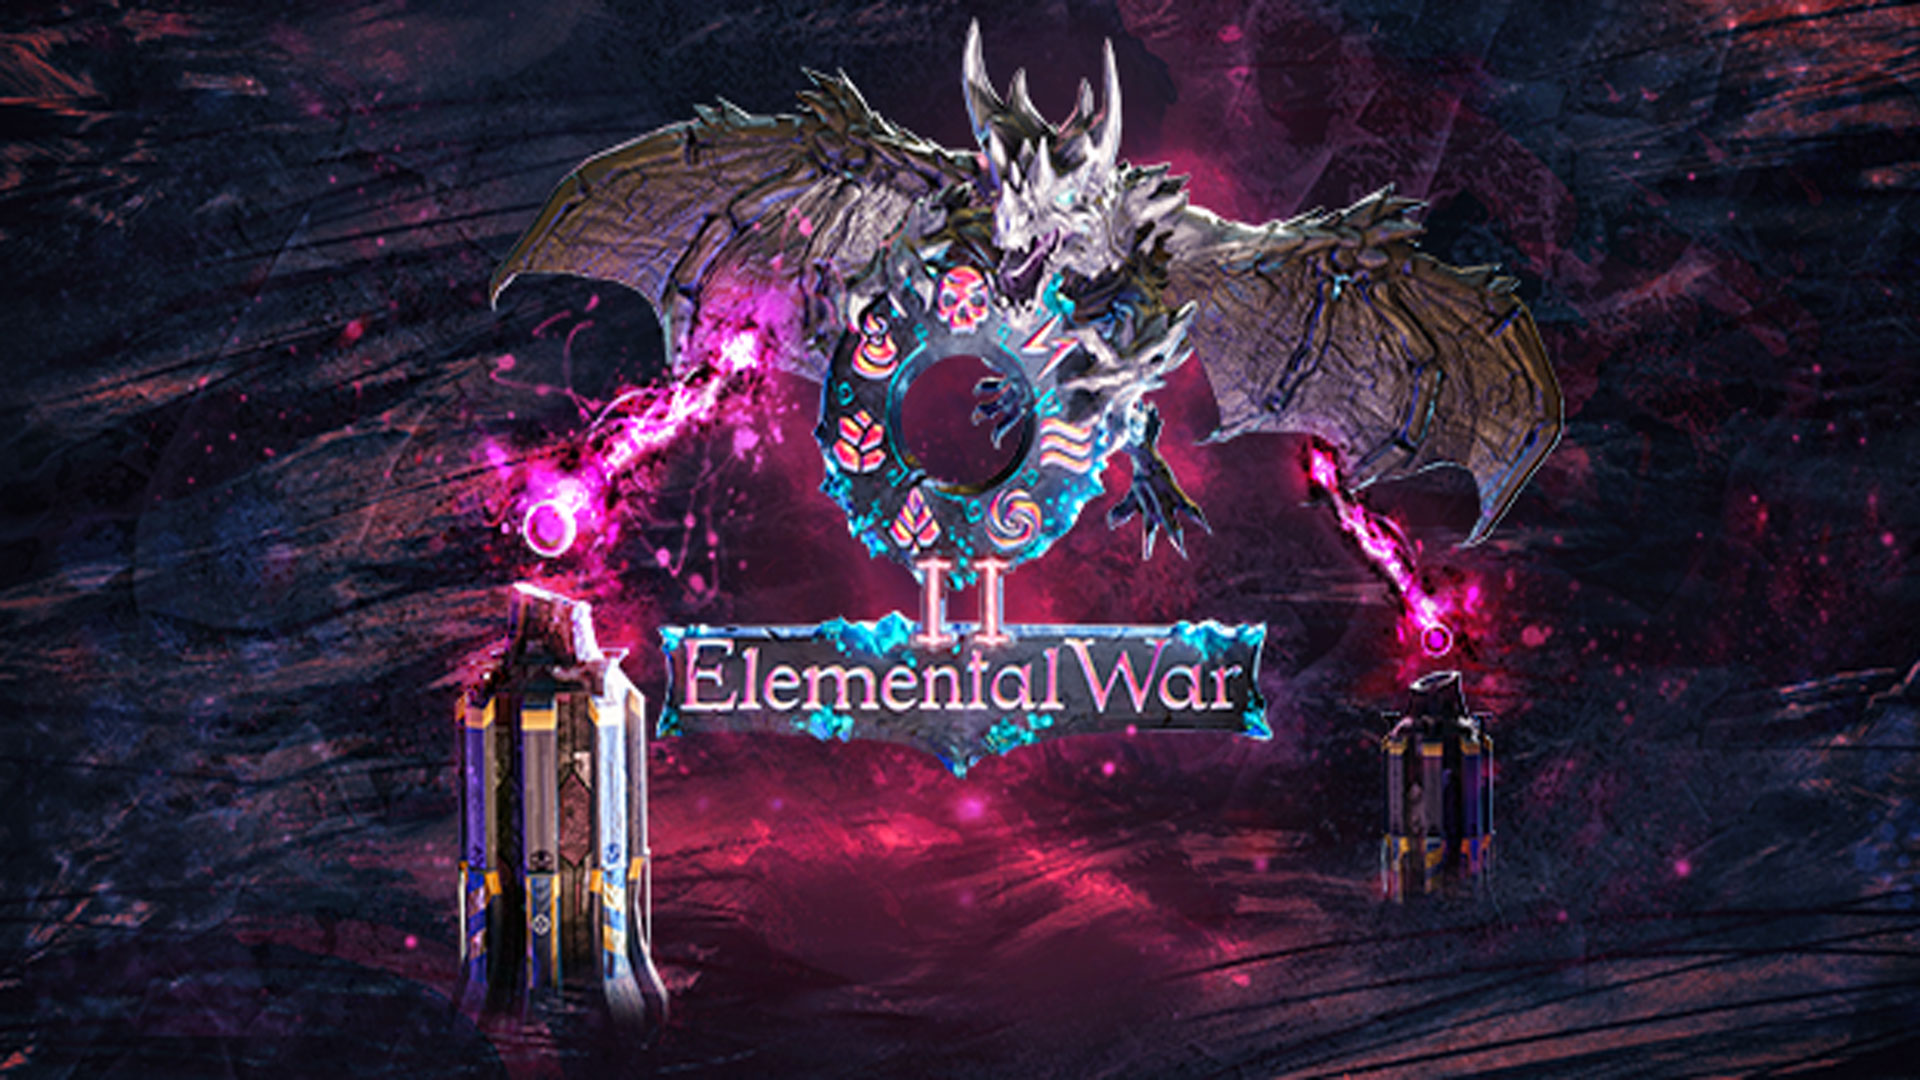 Video For Elemental War 2 Coming May 6 to Xbox One, Xbox Series X|S, and PC